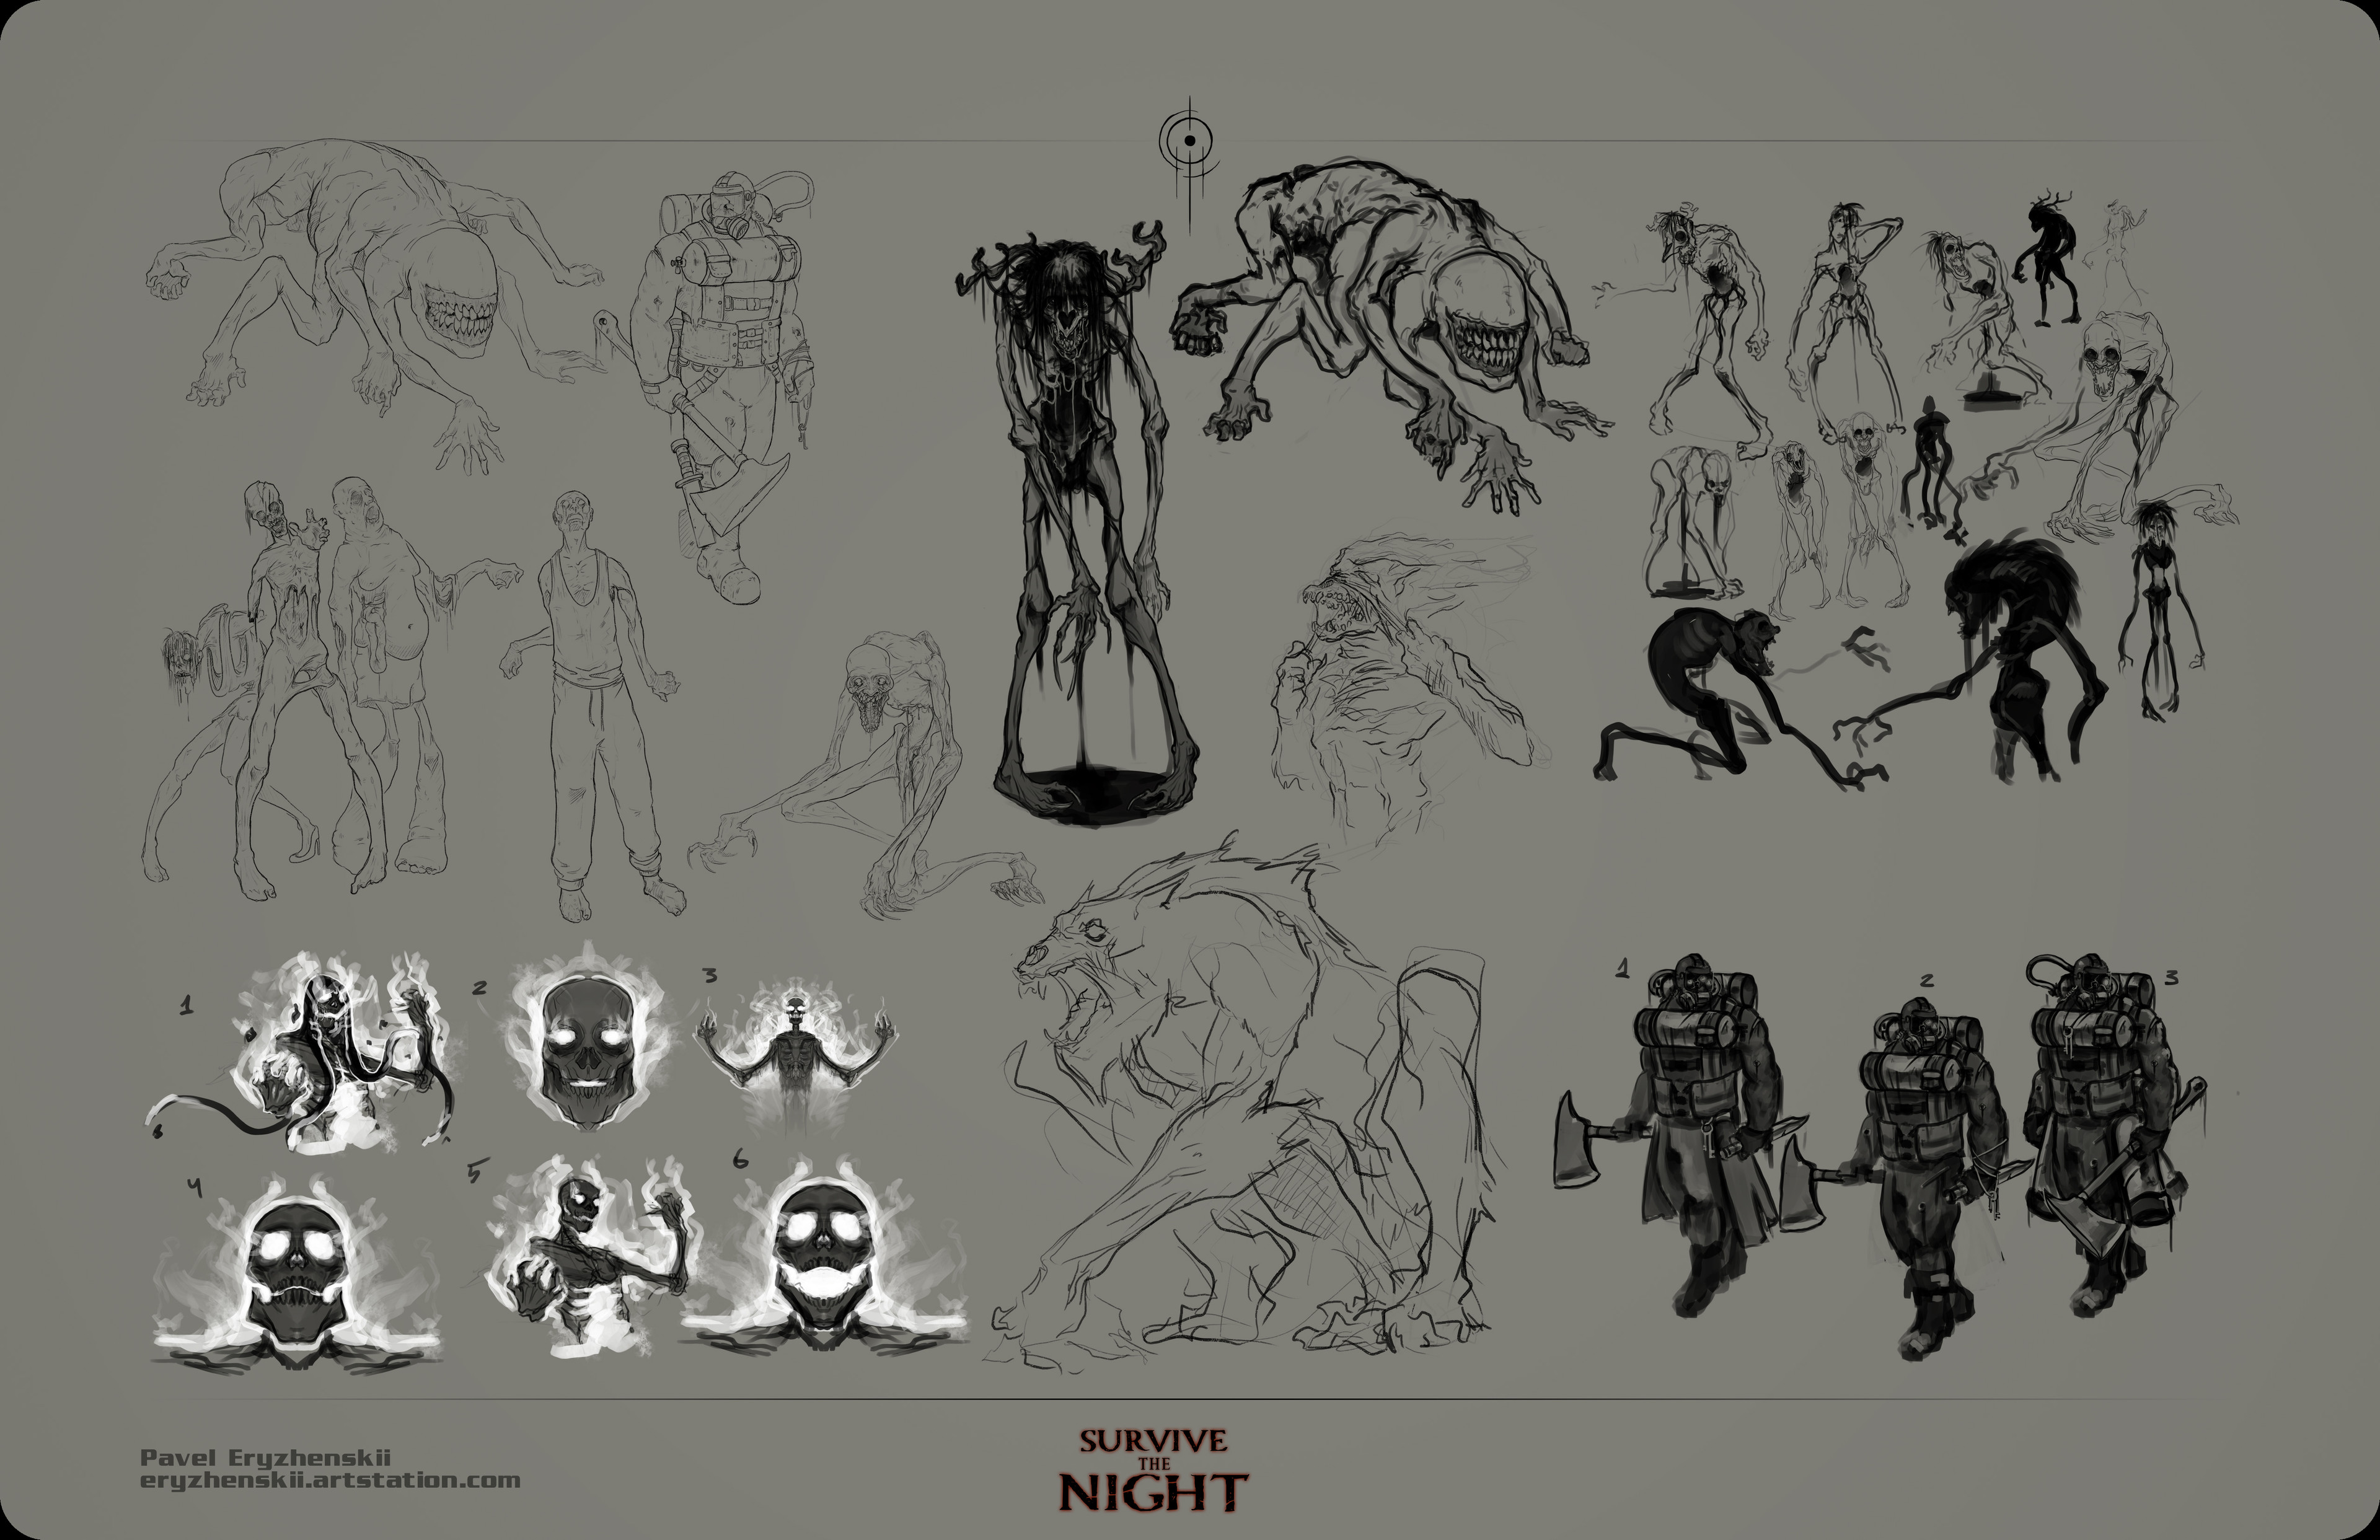 Some of the thumbnails and other WIP stuff.